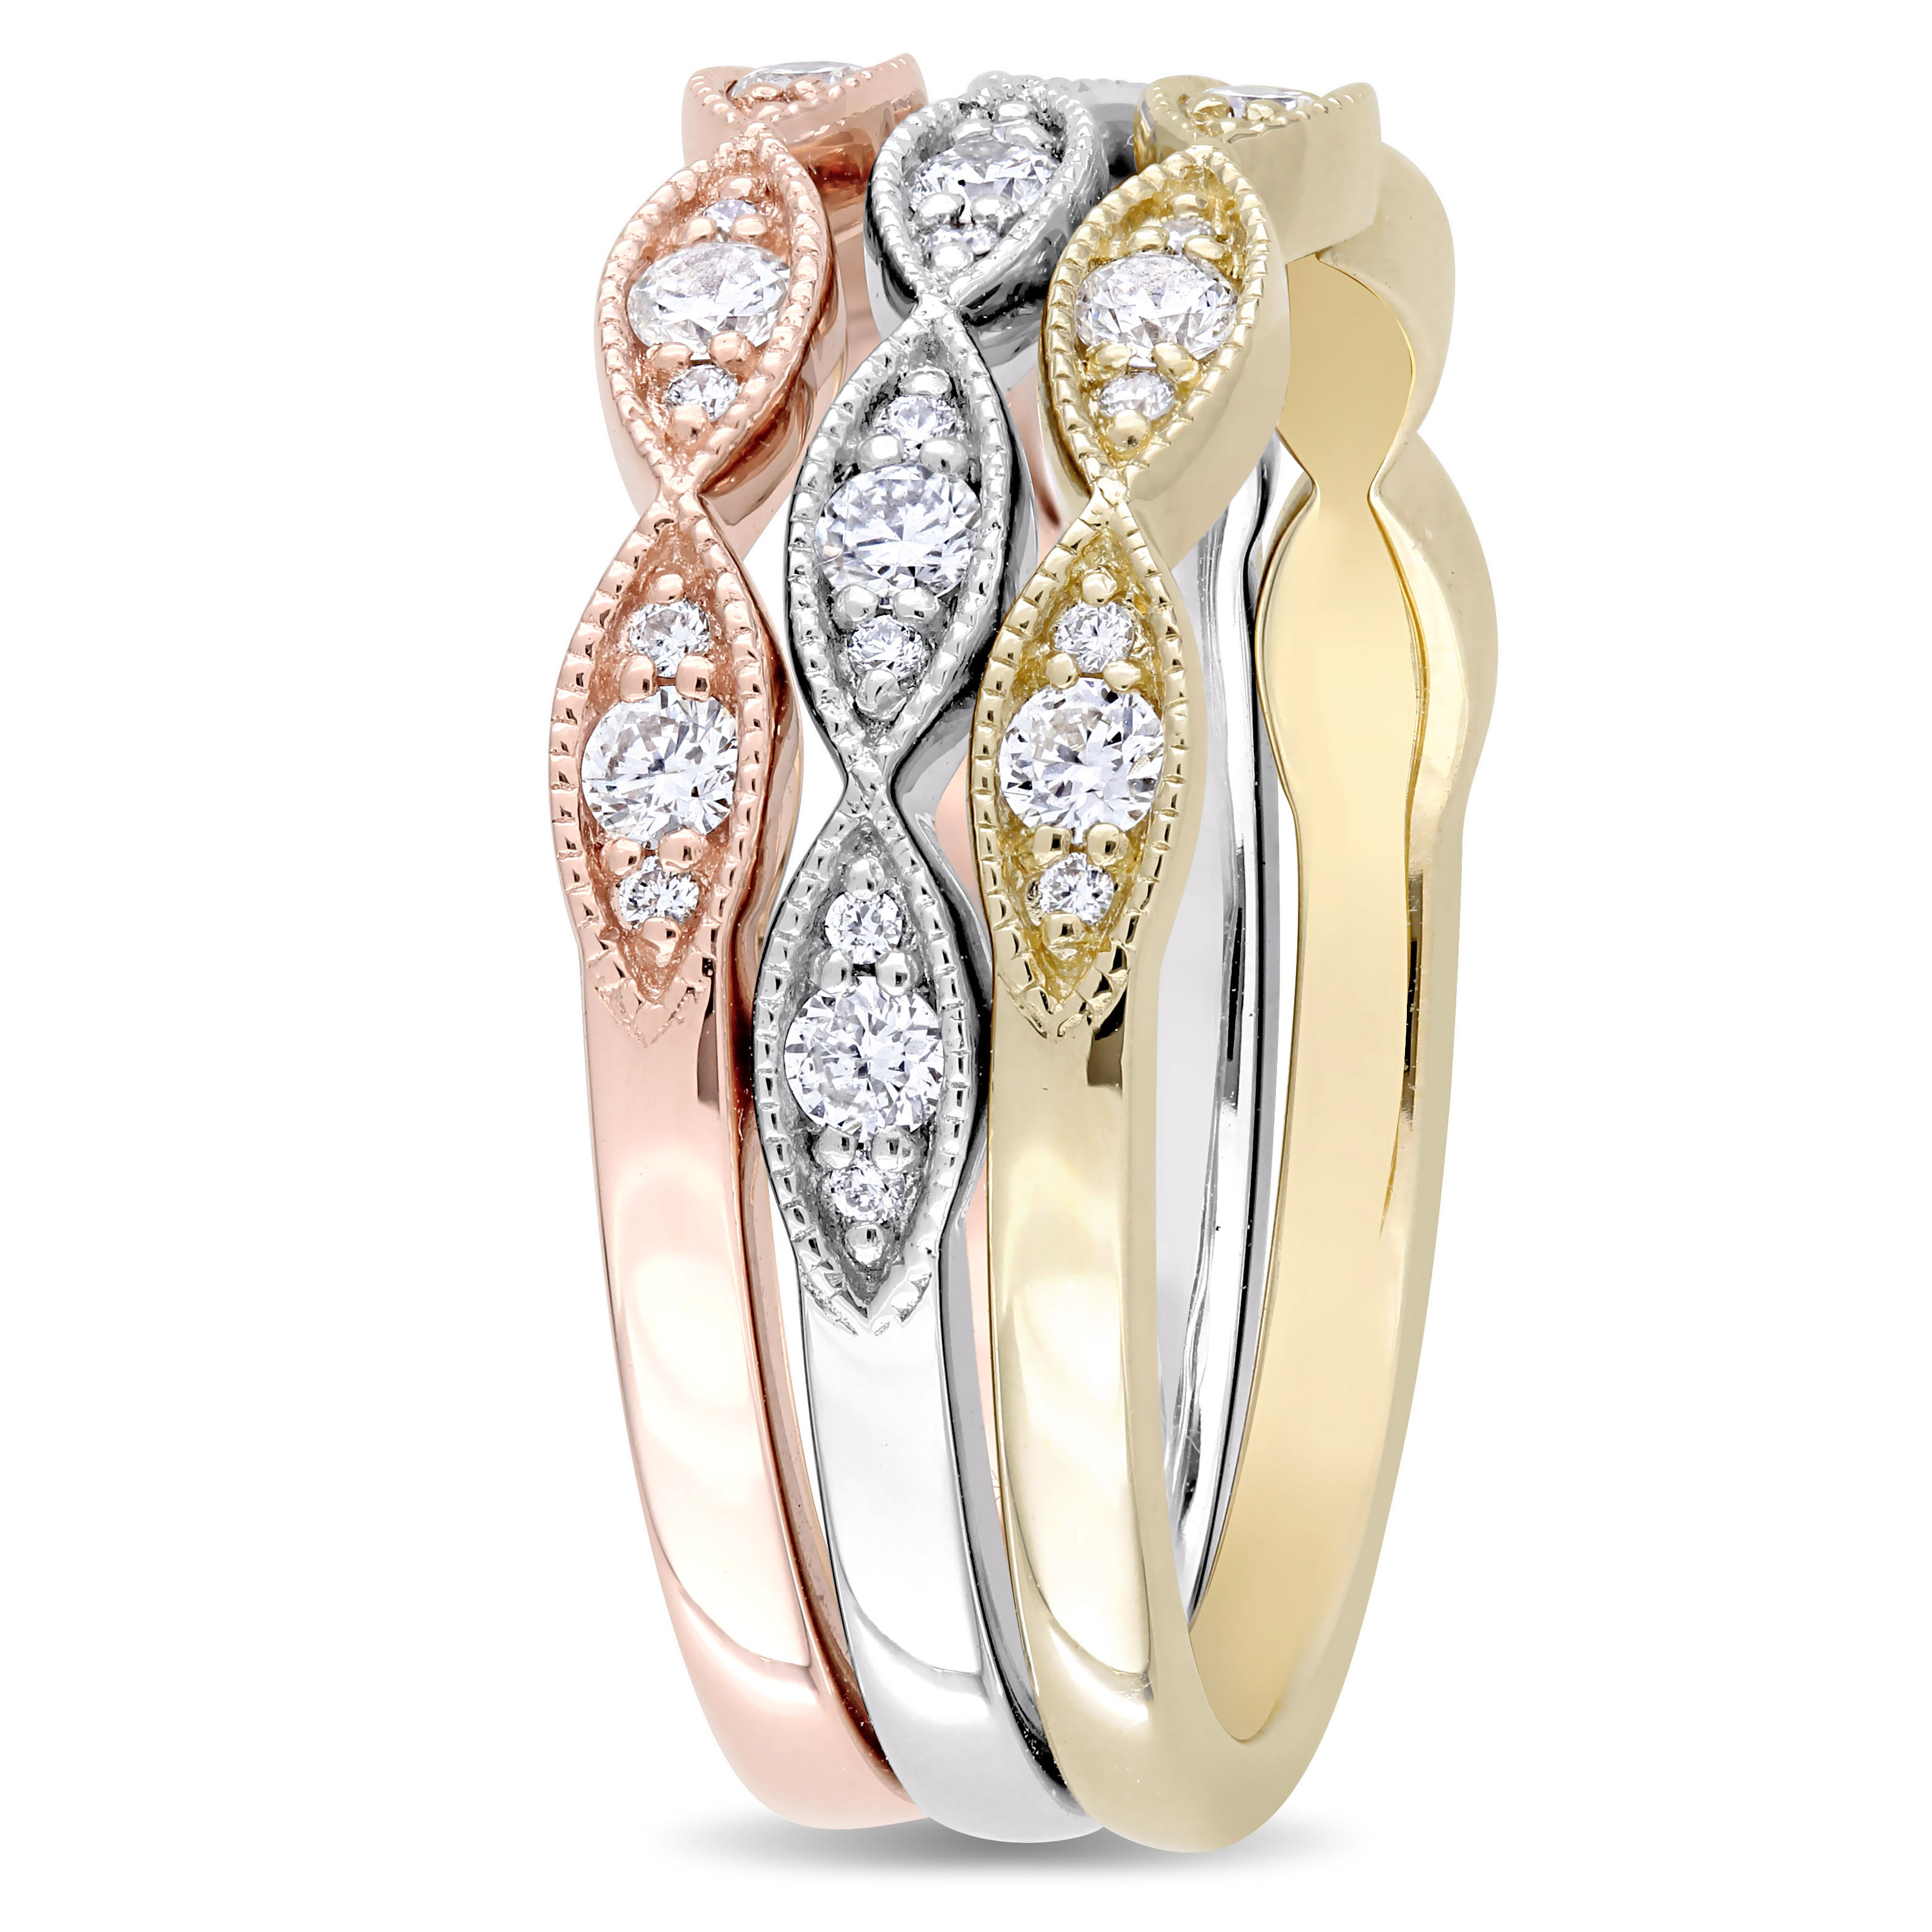 1/2 CT TW Diamond 3-Pc Stacking Ring Set in 3- Tone 14k White, Rose and Yellow Gold